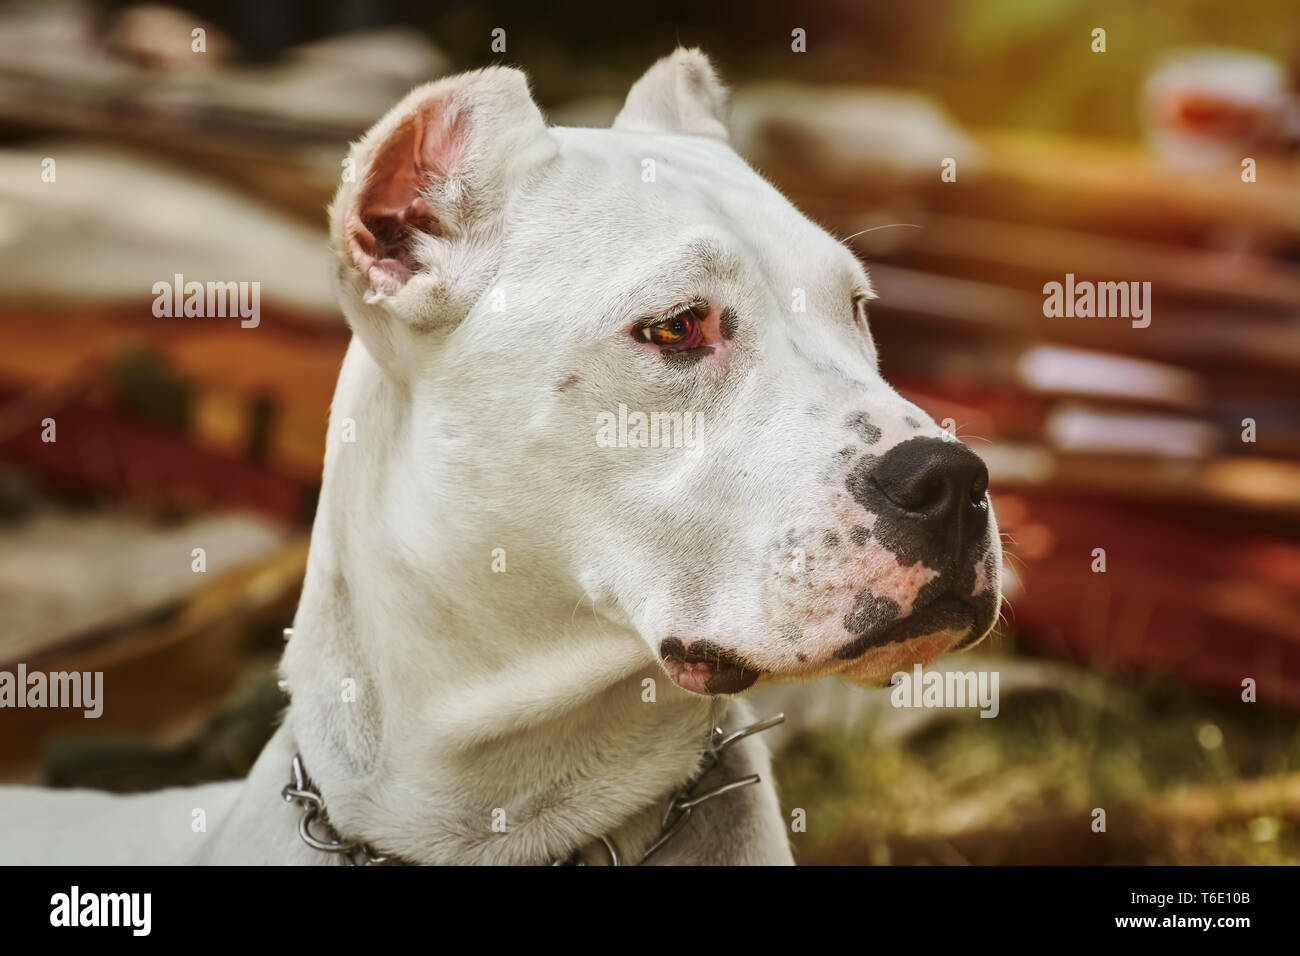 American Staffordshire Terrier Stock Photo